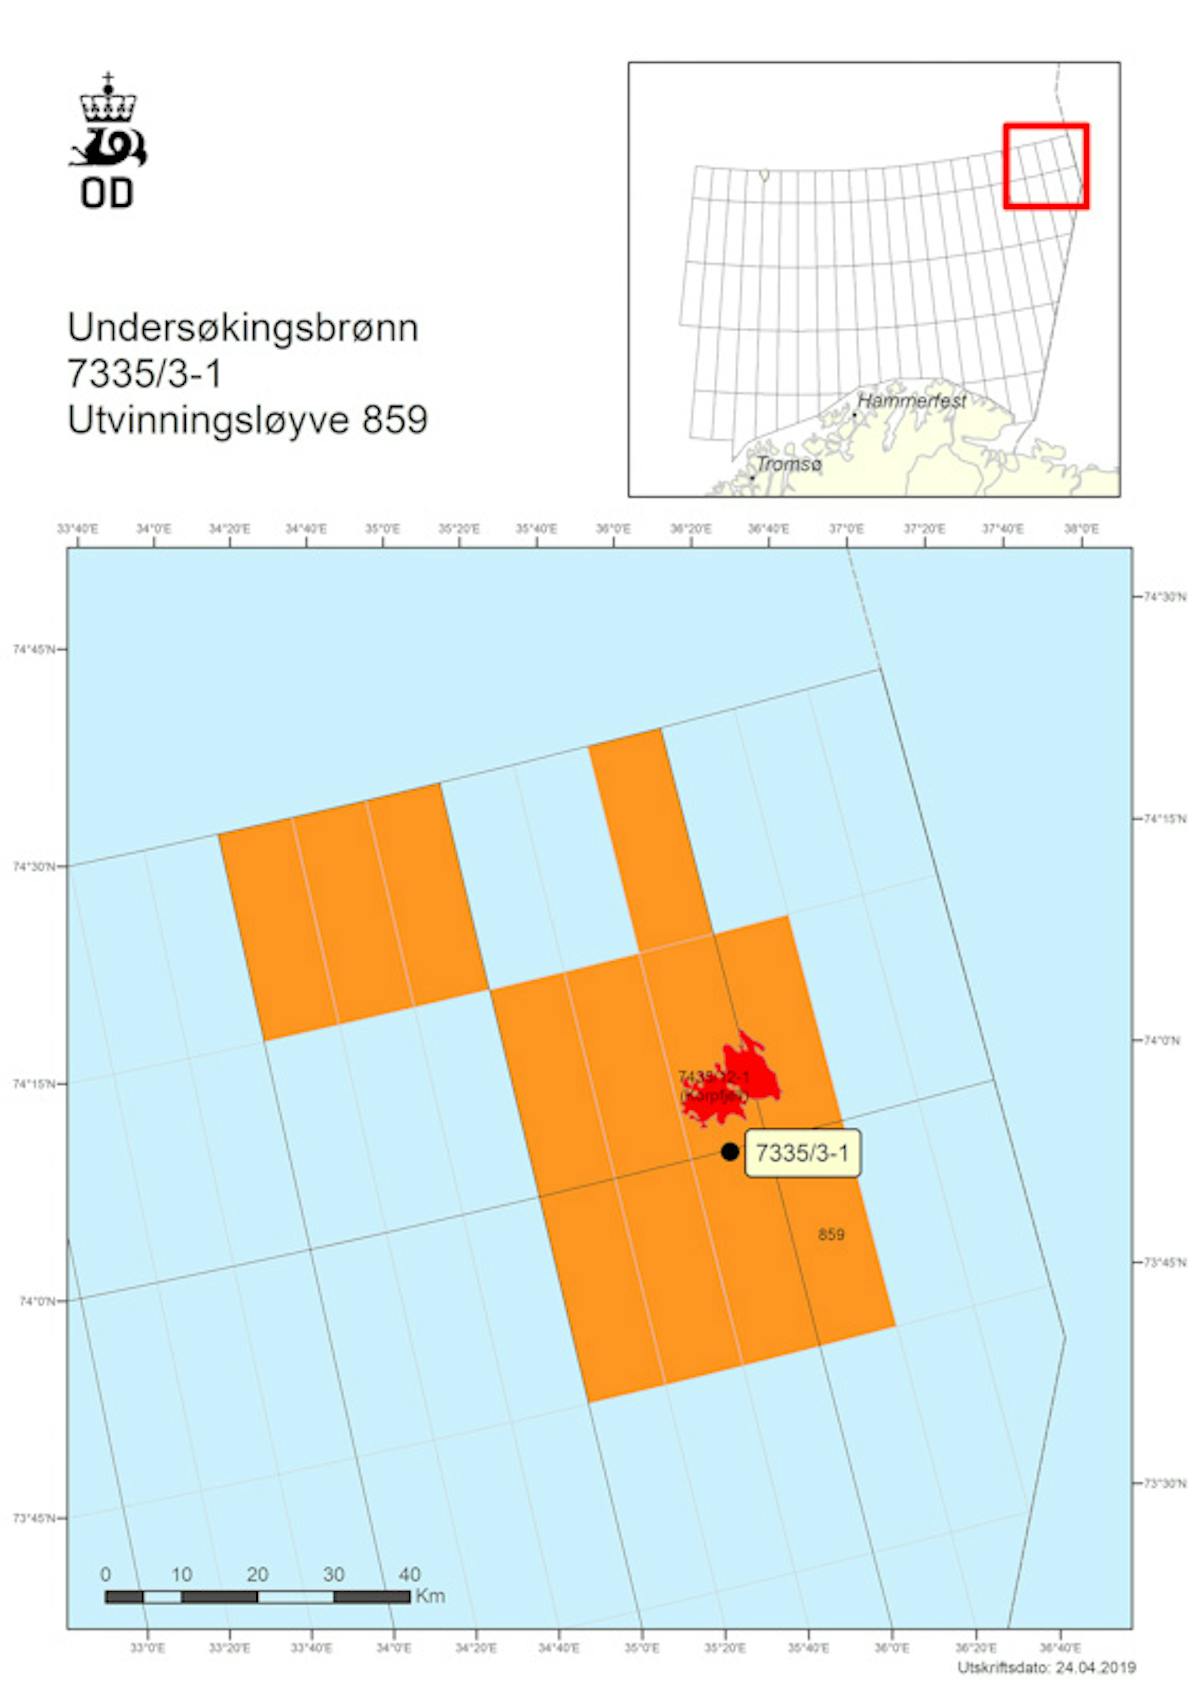 Exploration well 7335/3-1 on license PL 859 in the Norwegian sector of the Barents Sea